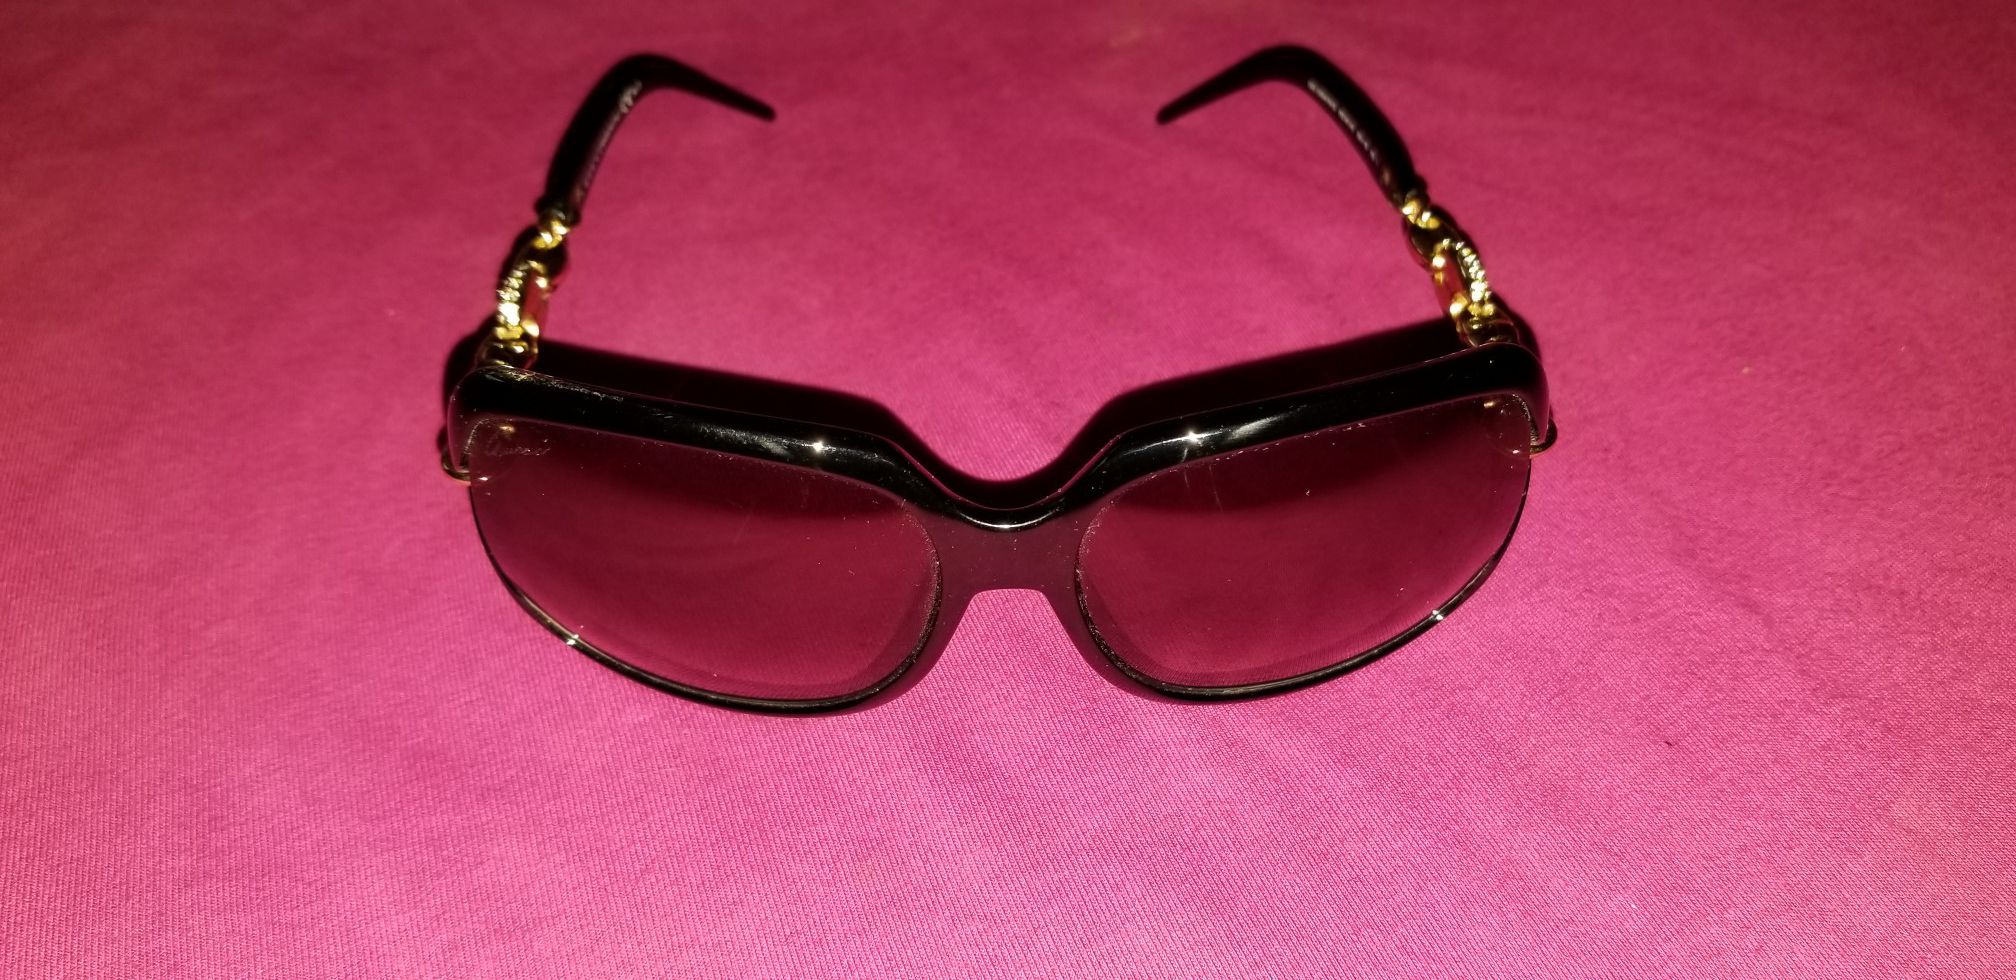 Authentic womans Gucci Sunglasses GG 3584/s black and gold